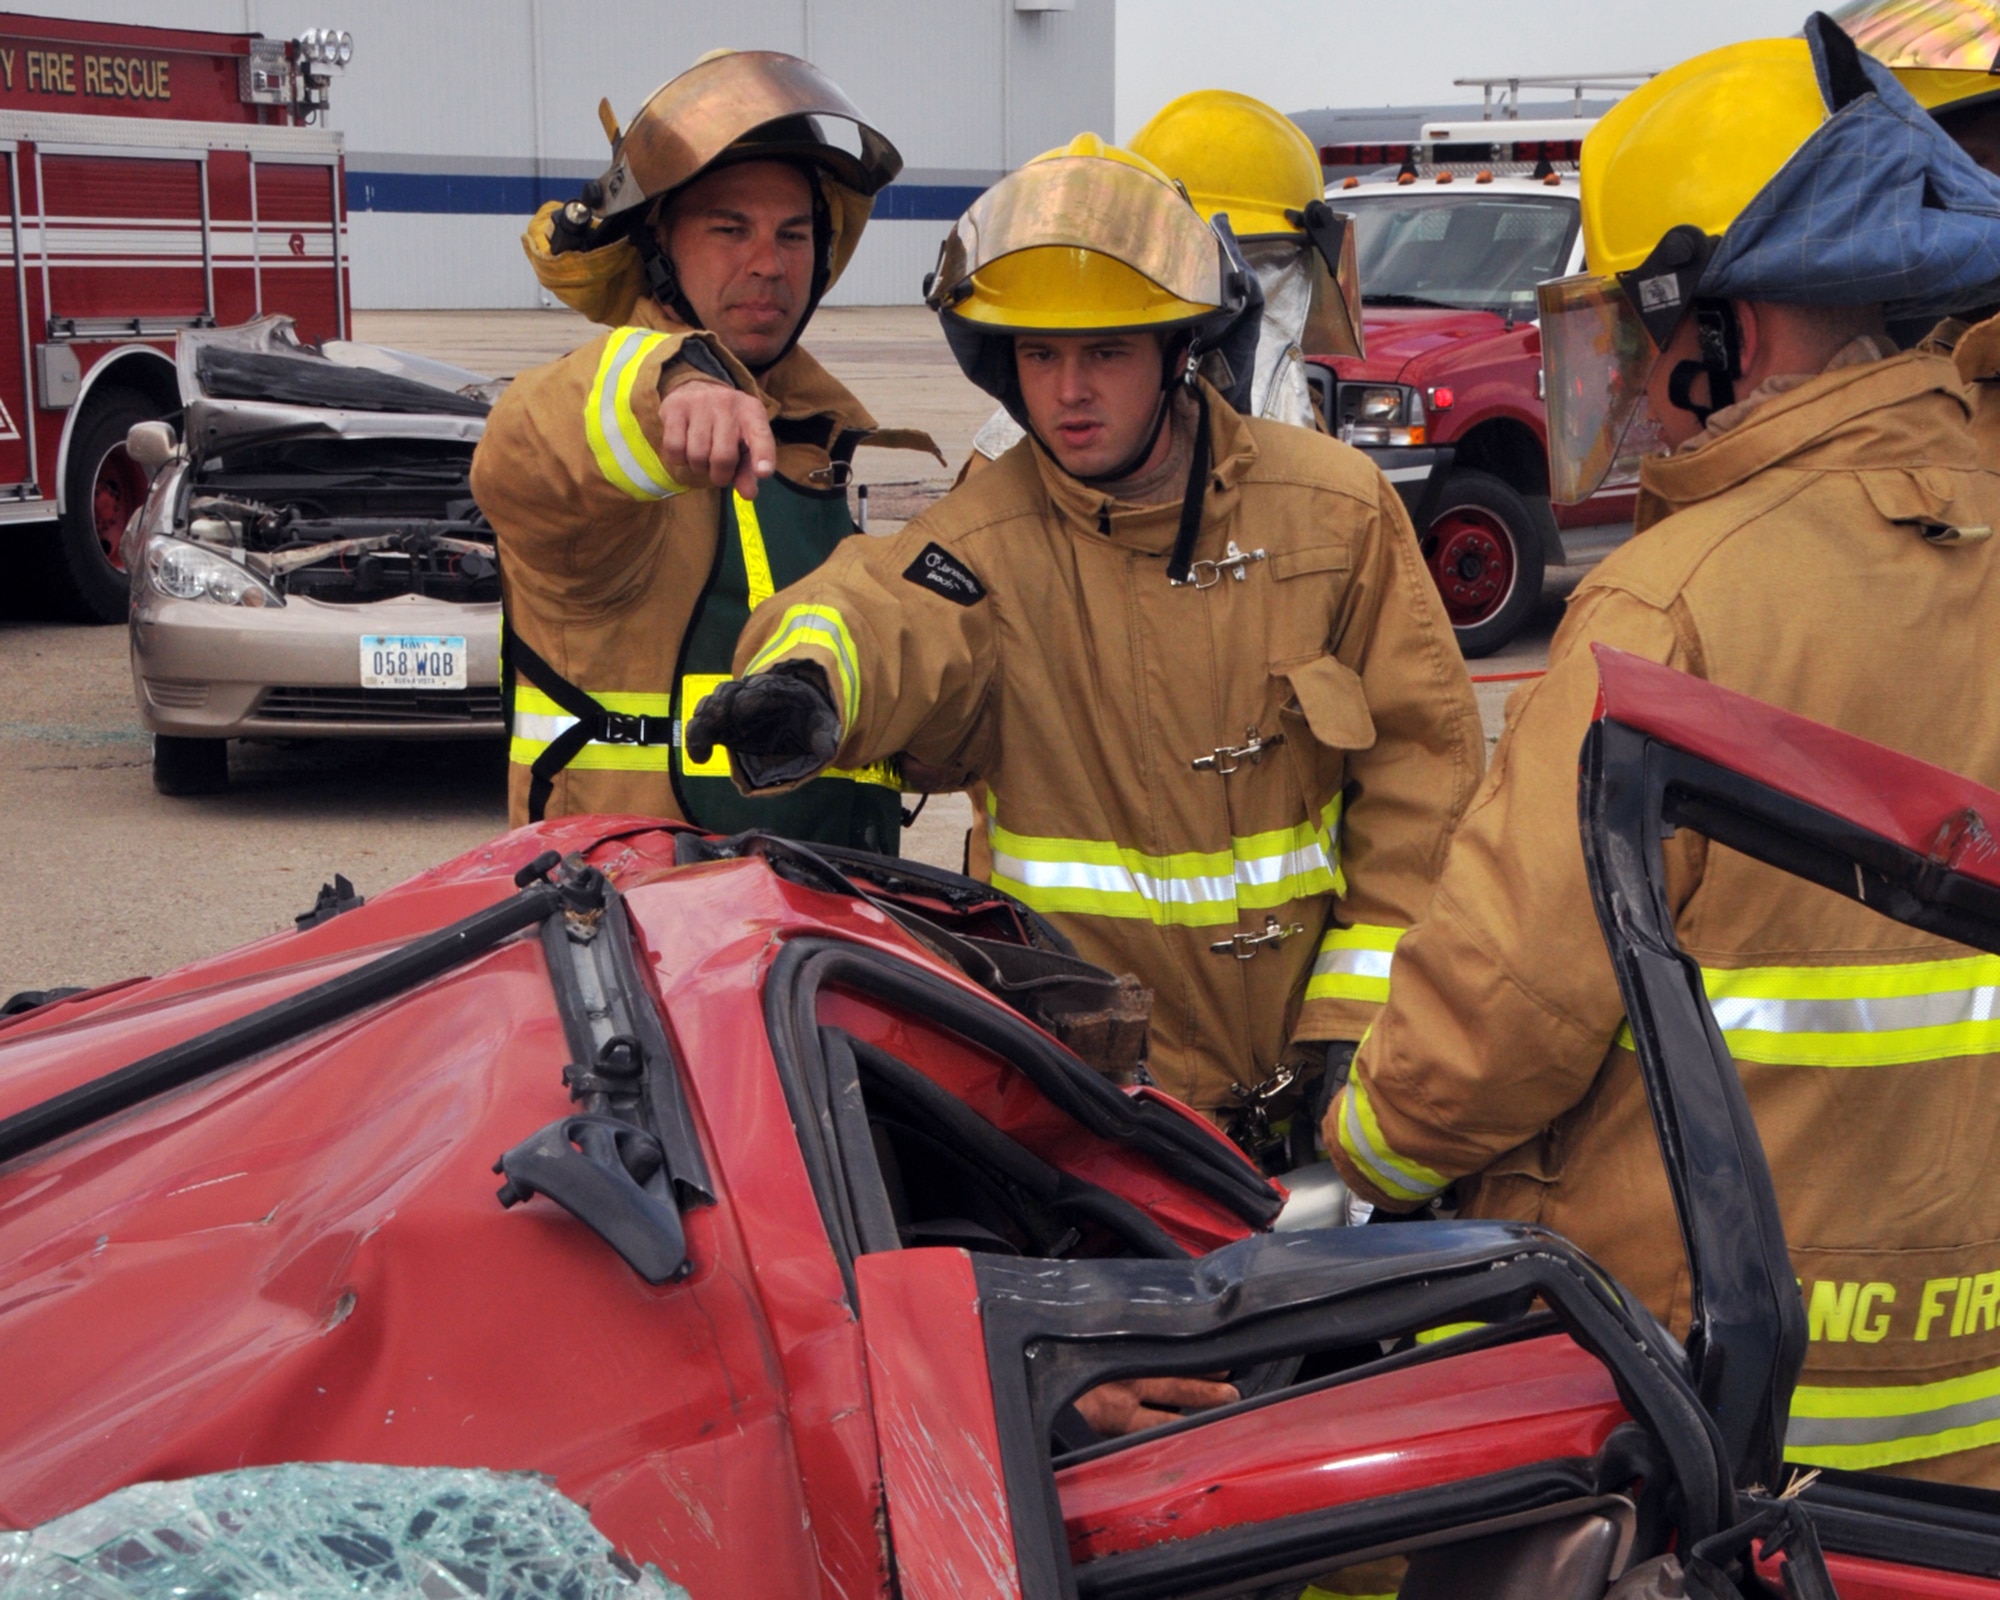 Members of the 185th Air Refueling Wing Fire Protection Services Flight, along with other local fire and rescue groups, practice using the tools and techniques to extract victims from vehicles during a mass casualty exercise at the Sioux Gateway Airport/Col. Bud Day Field in Sioux City, Iowa on Saturday May 2, 2015.  (U.S. Air National Guard photo by Tech. Sgt. Bill Wiseman/Released) 